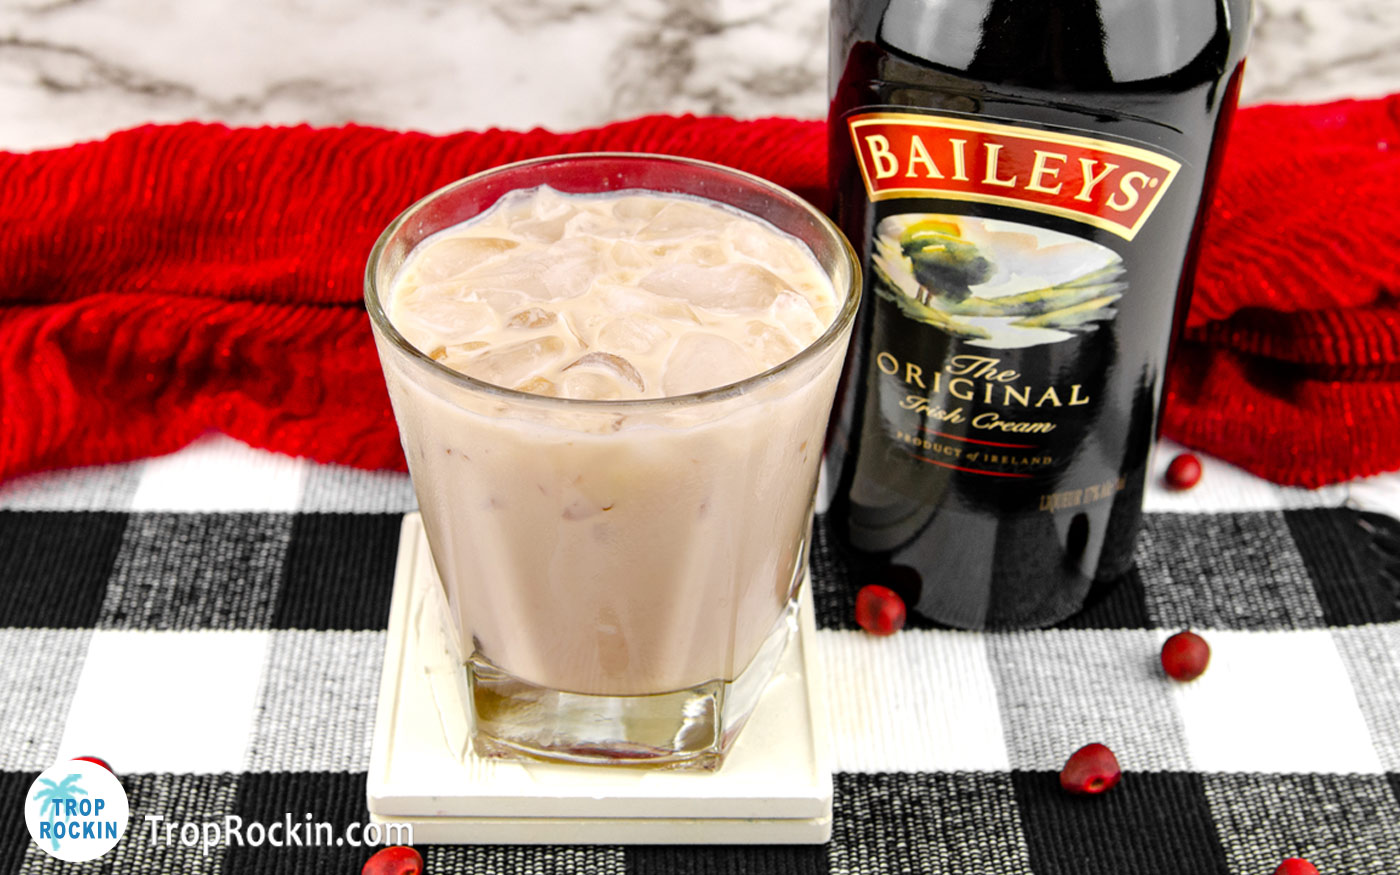 Bailey's White Russian drink with a bottle of Bailey's Irish Cream in the background.